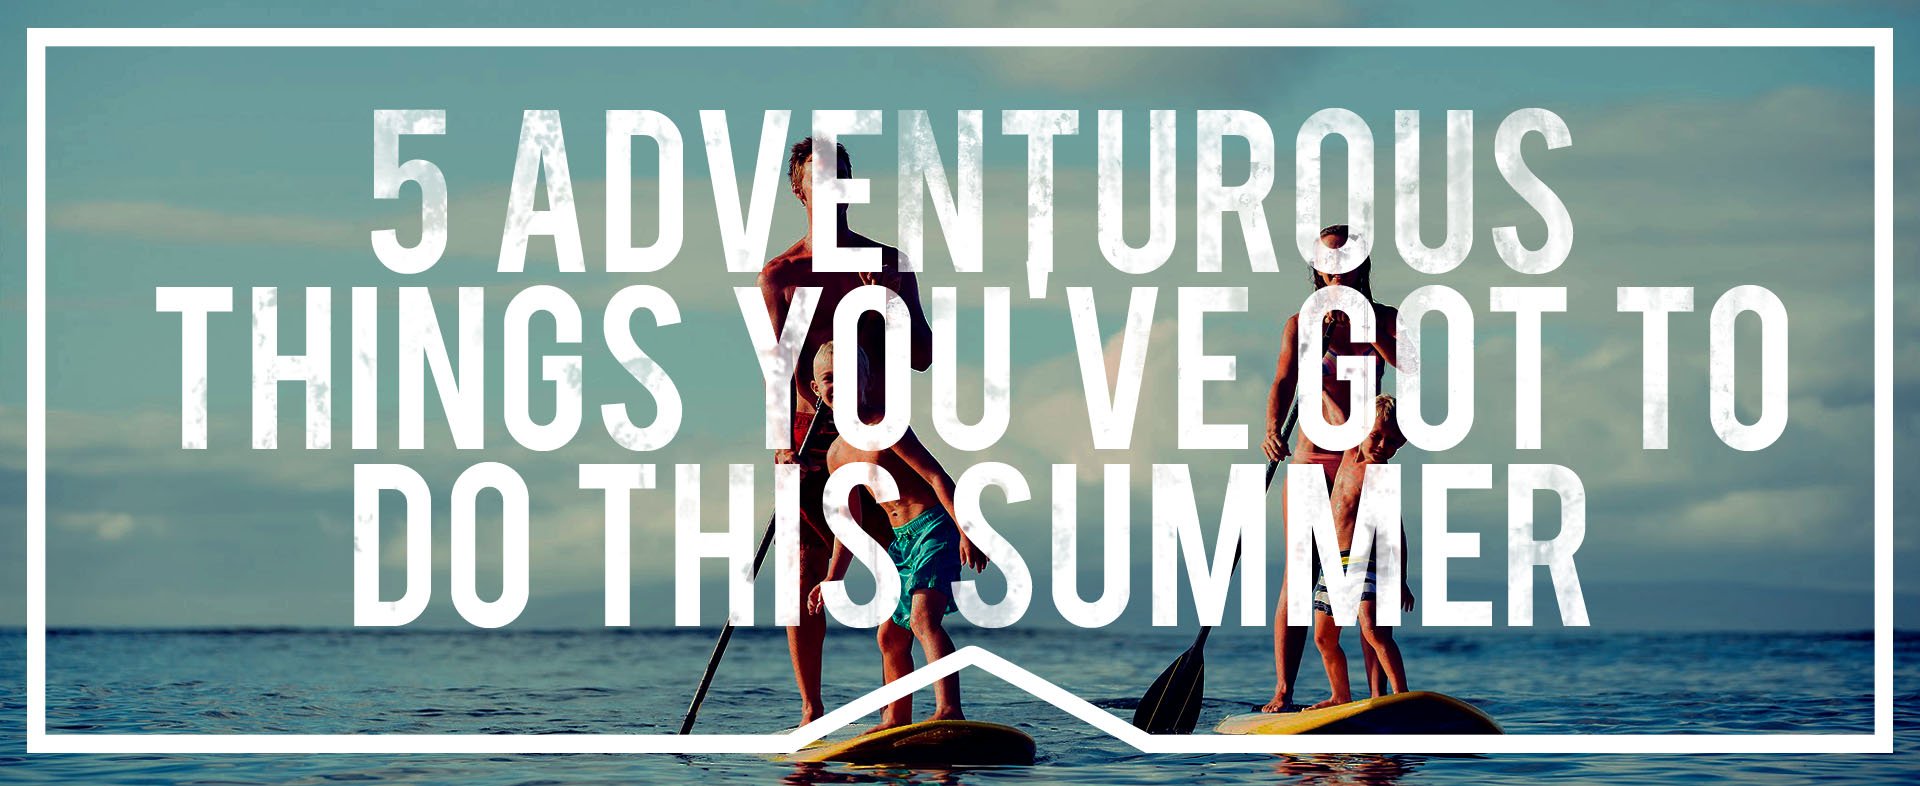 5 Adventurous Things You've Got to Do This Summer